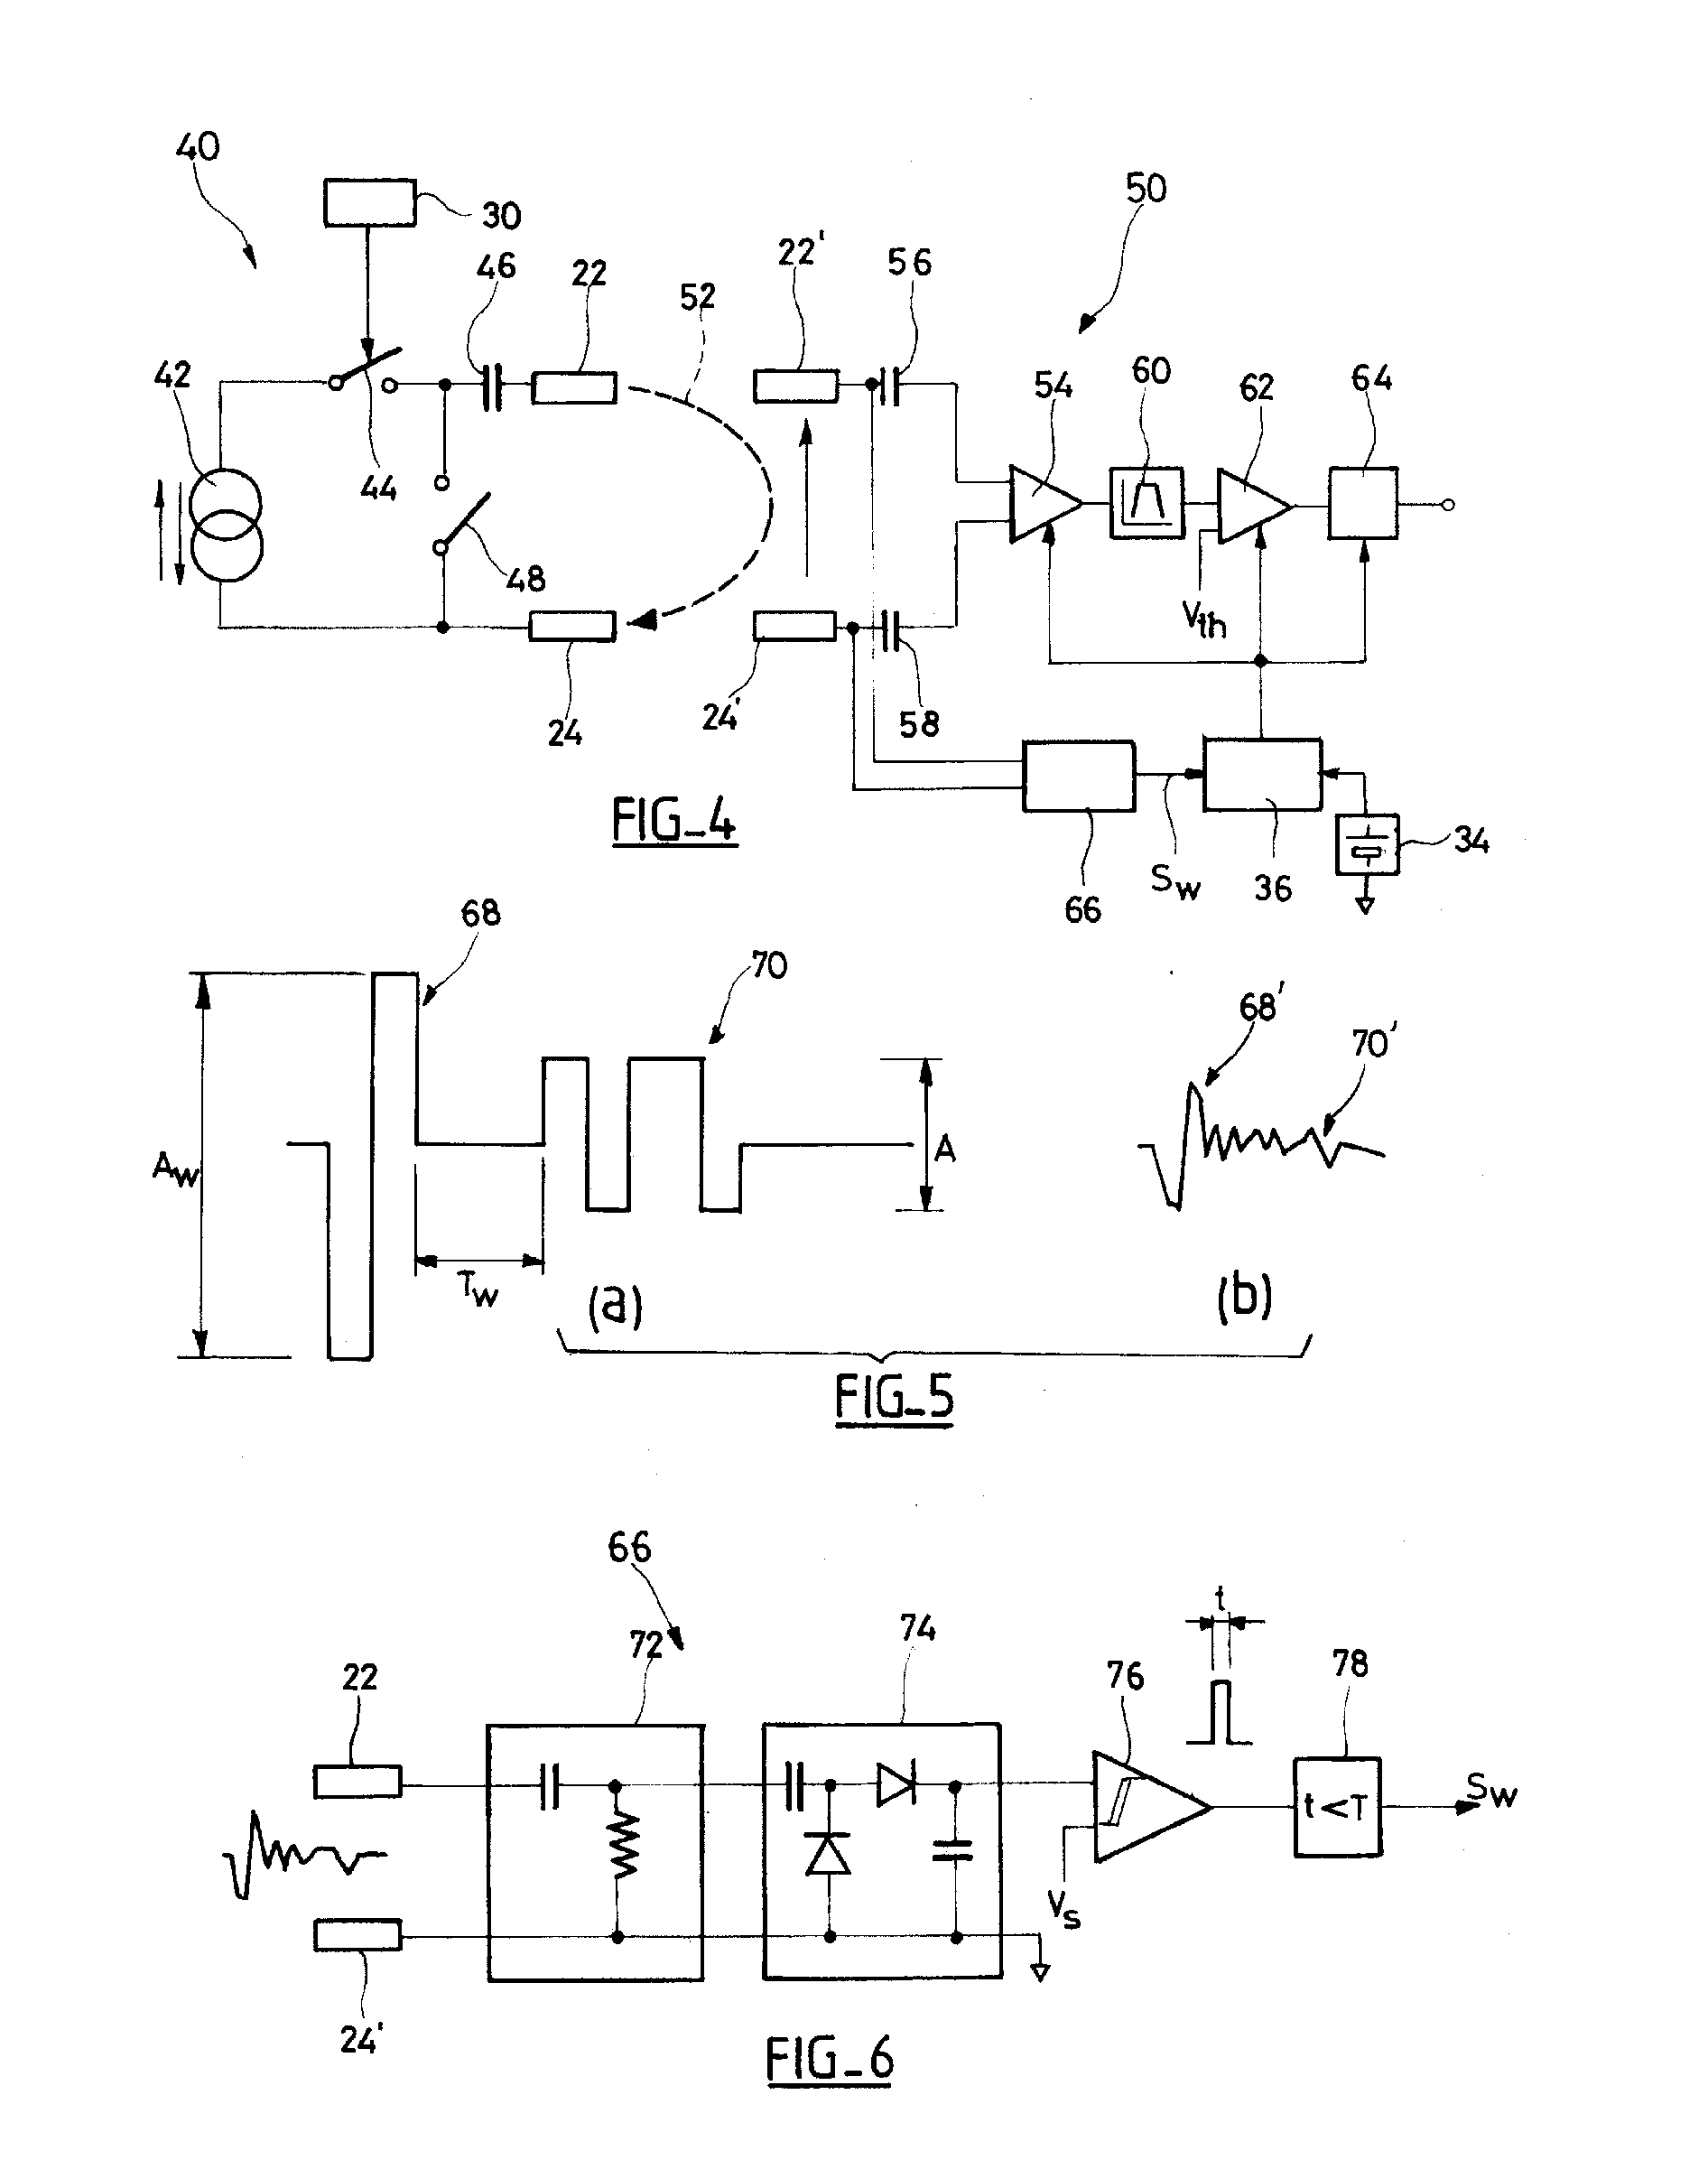 System, Methods And Apparatus For Waking An Autonomous Active Implantable Medical Device Communicating By Pulses Transmitted Through The Interstitial Tissues Of The Body